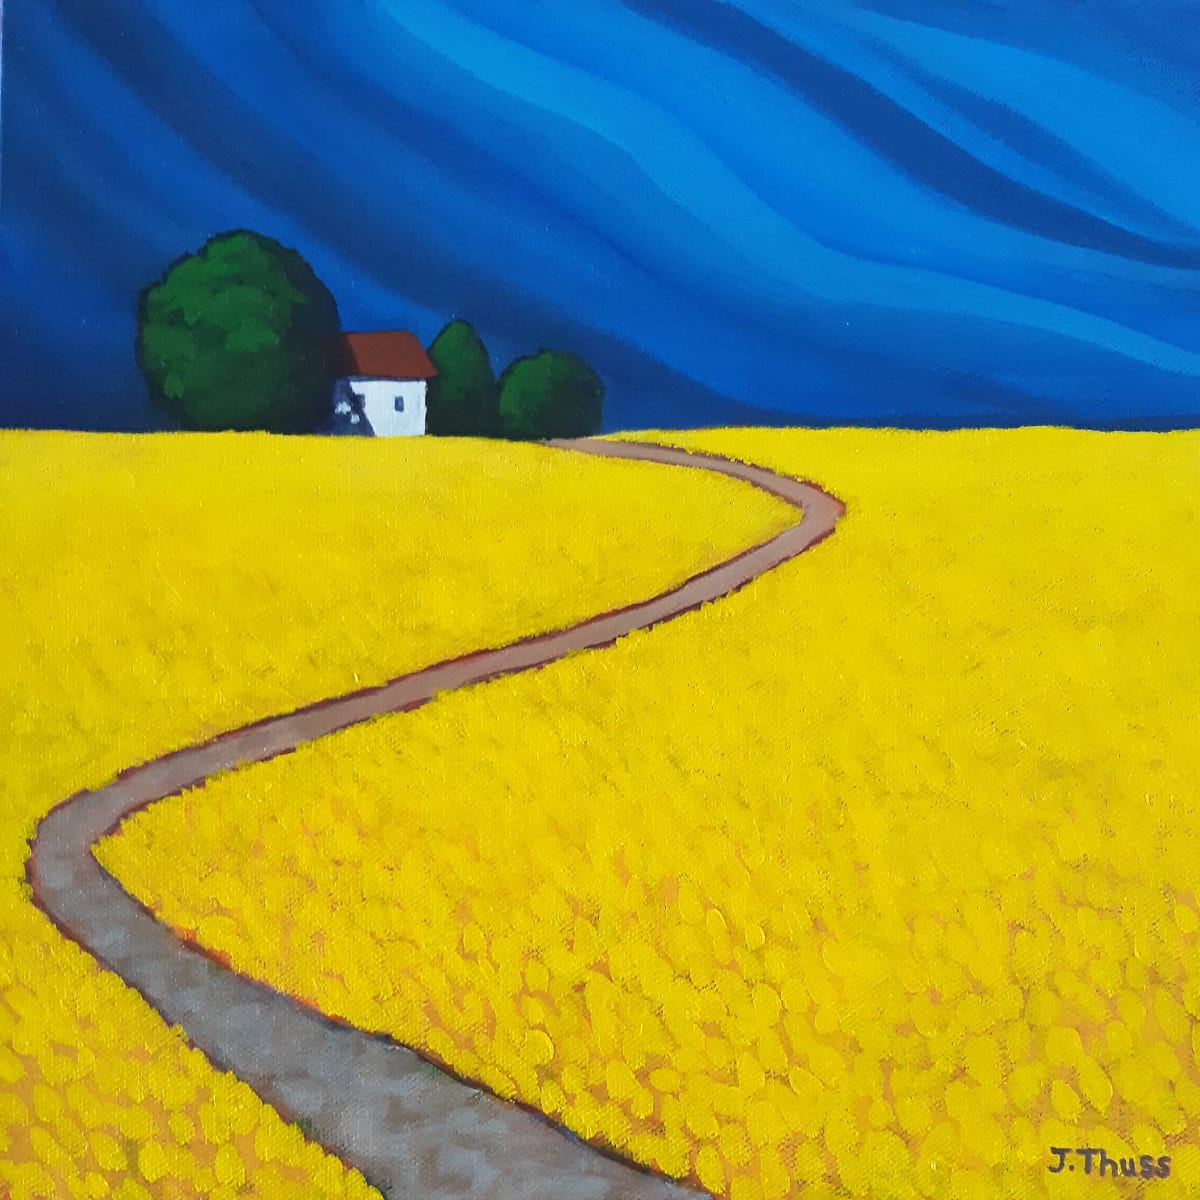 Down The Lane by Jane Thuss  Image: A dusty lane winds its way down from the top of the hill, where a white and red house sits, overlooking the bright yellow canola fields. 